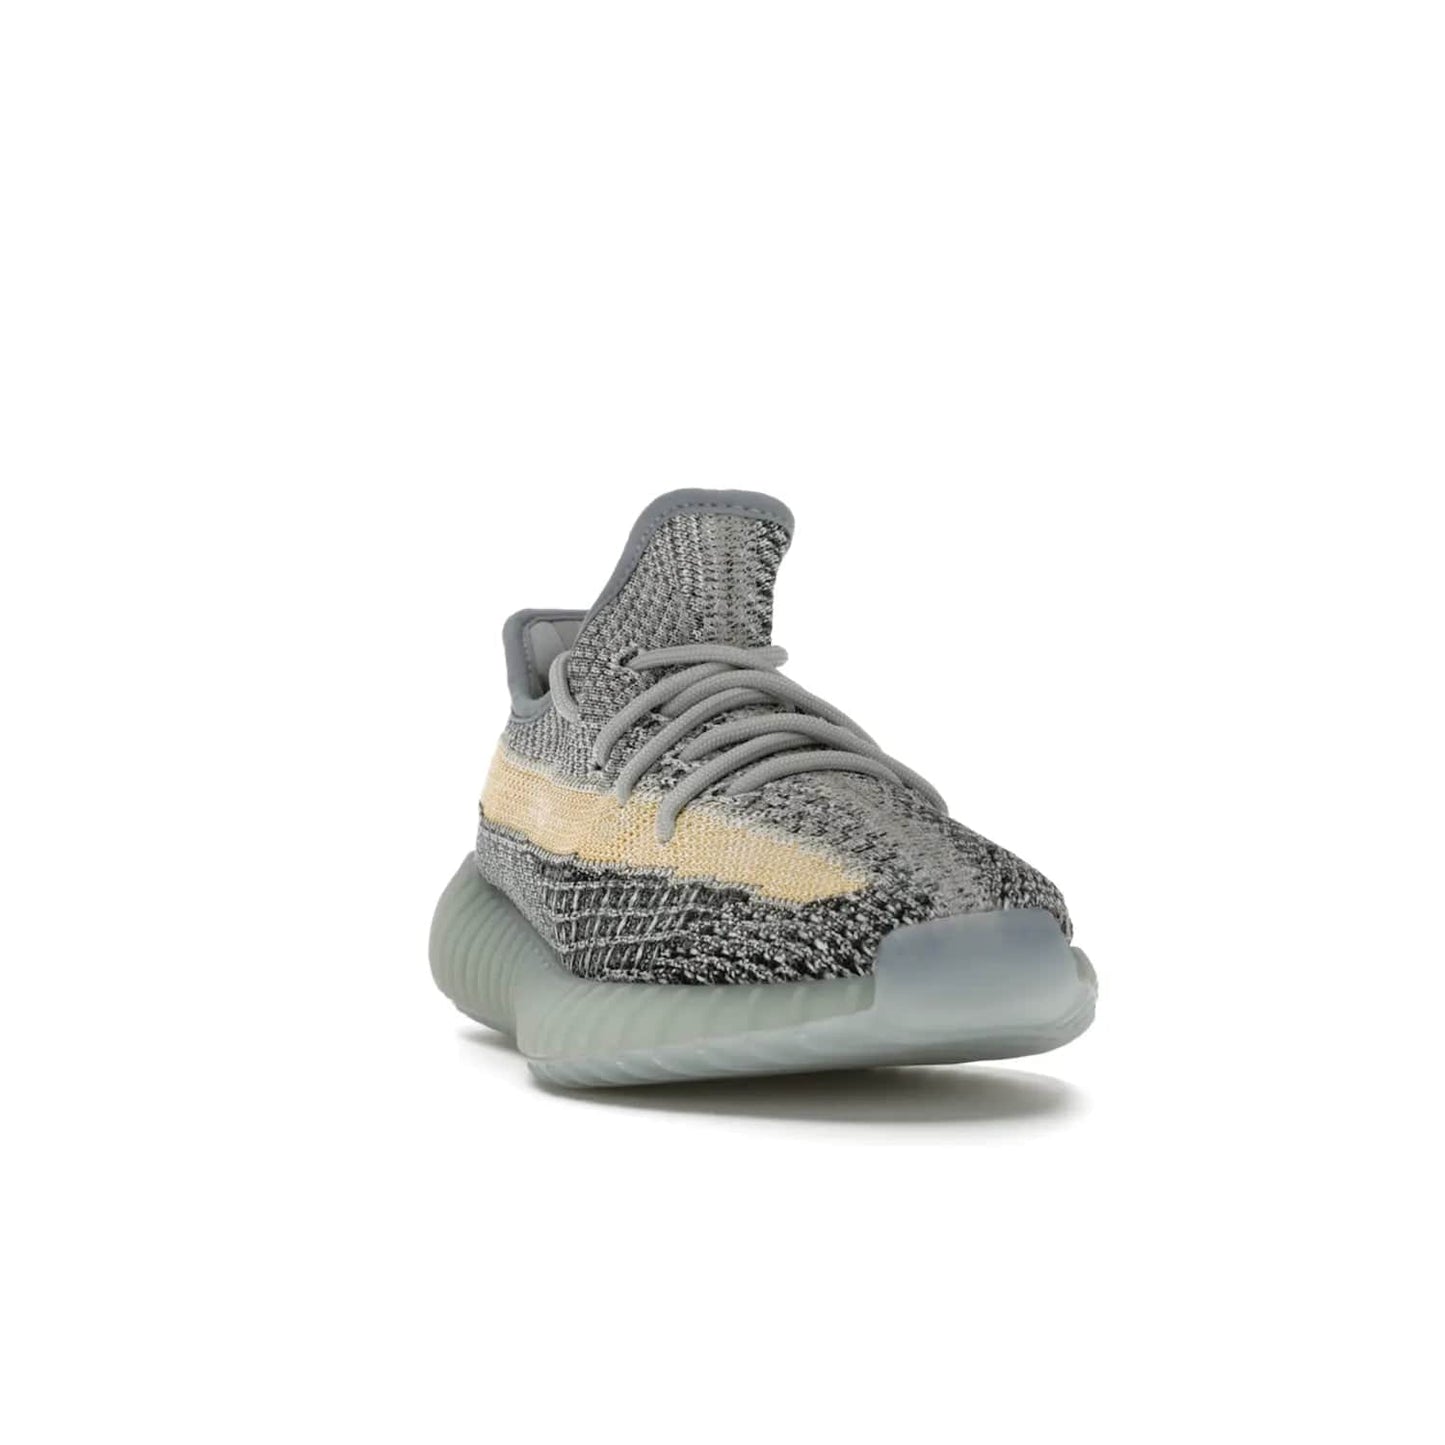 adidas Yeezy Boost 350 V2 Ash Blue - Image 8 - Only at www.BallersClubKickz.com - Must-have design made of engineered primeknit upper, comfortable sock-like upper and full-length Boost midsole, and semi-translucent rubber cage for added durability and style. The adidas Yeezy Boost 350 V2 Ash Blue blends timeless colors and comfort.